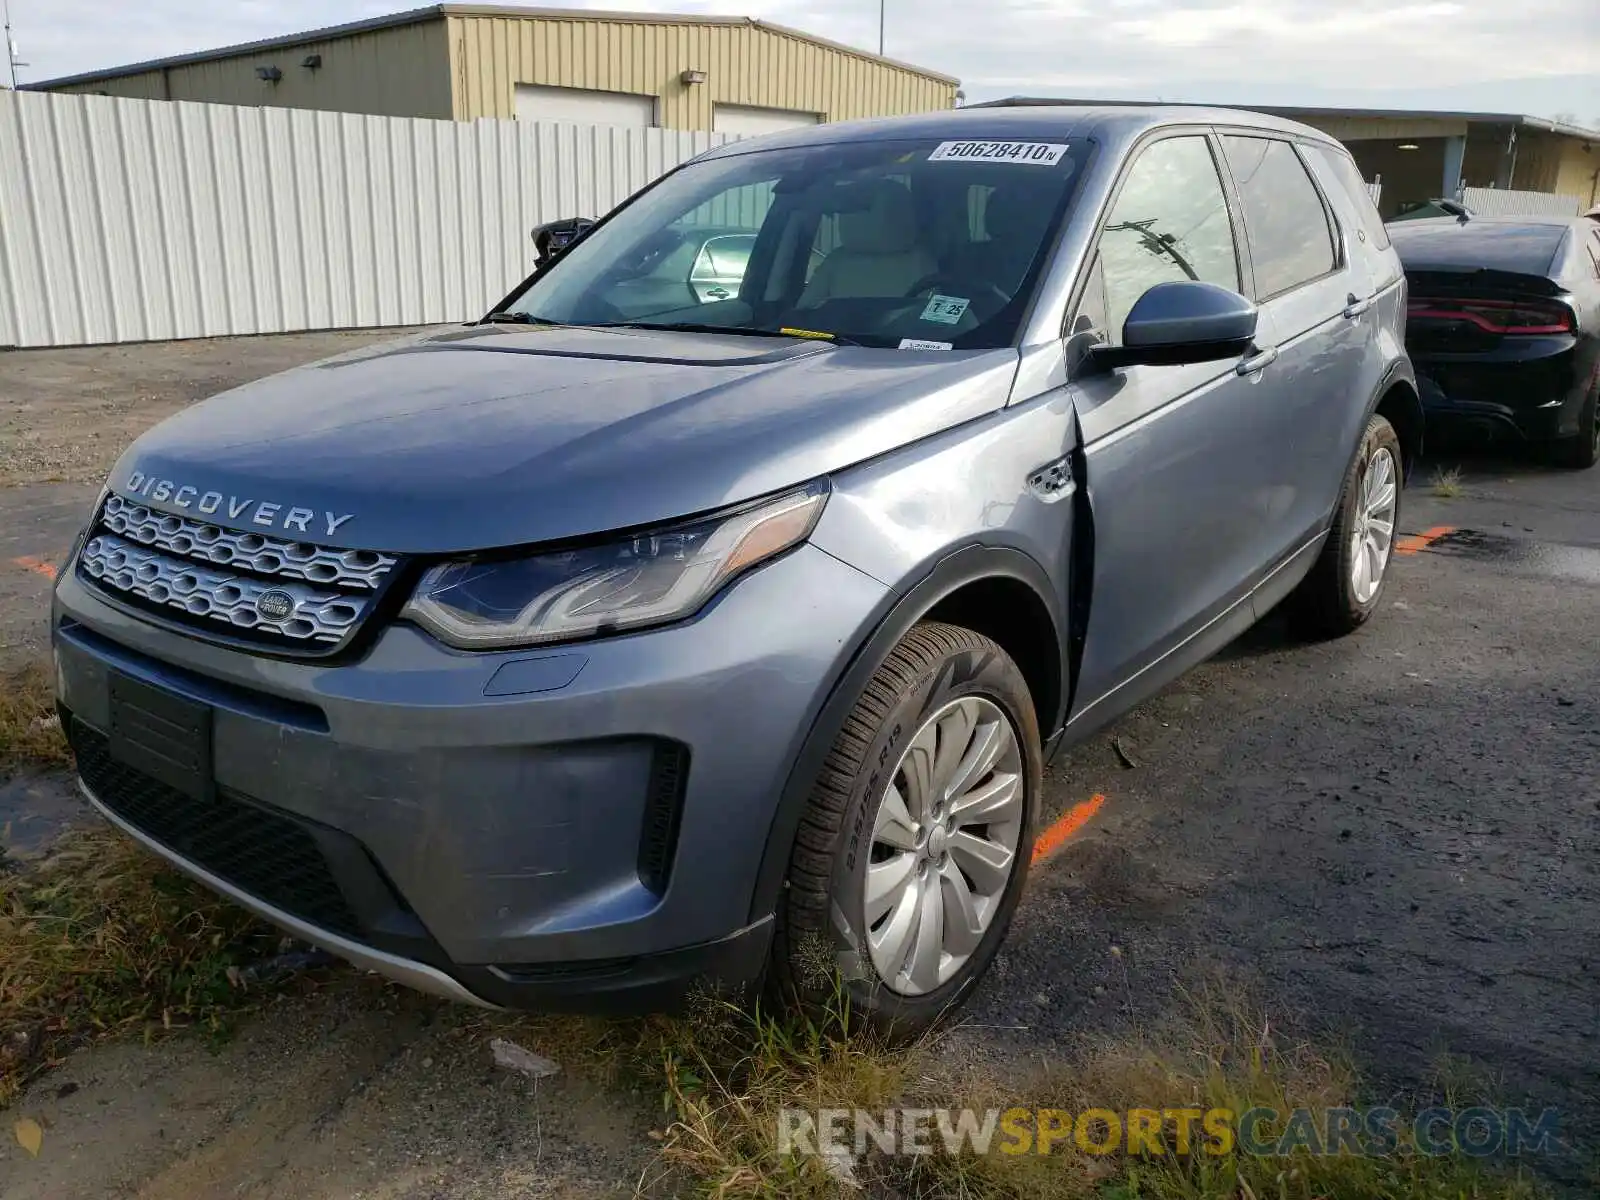 2 Photograph of a damaged car SALCP2FX9LH865279 LAND ROVER DISCOVERY 2020